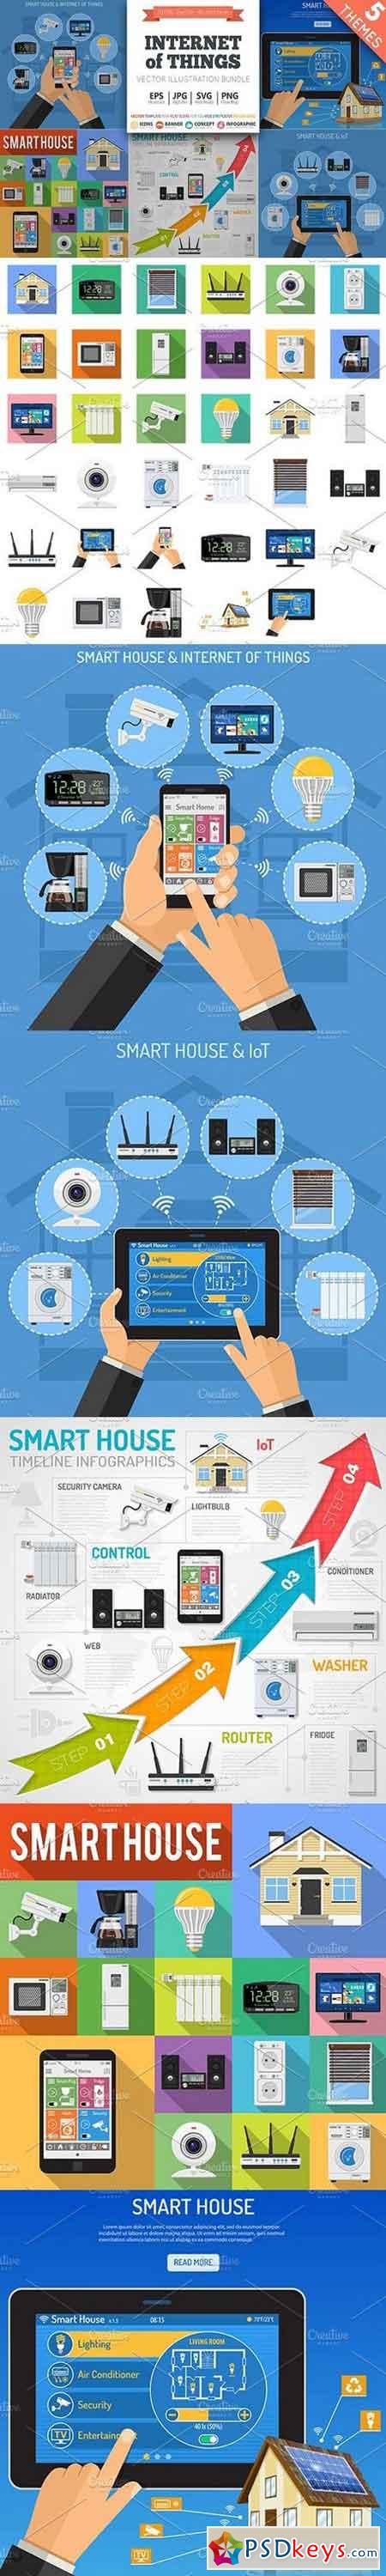 Smart House and internet of things 1493493